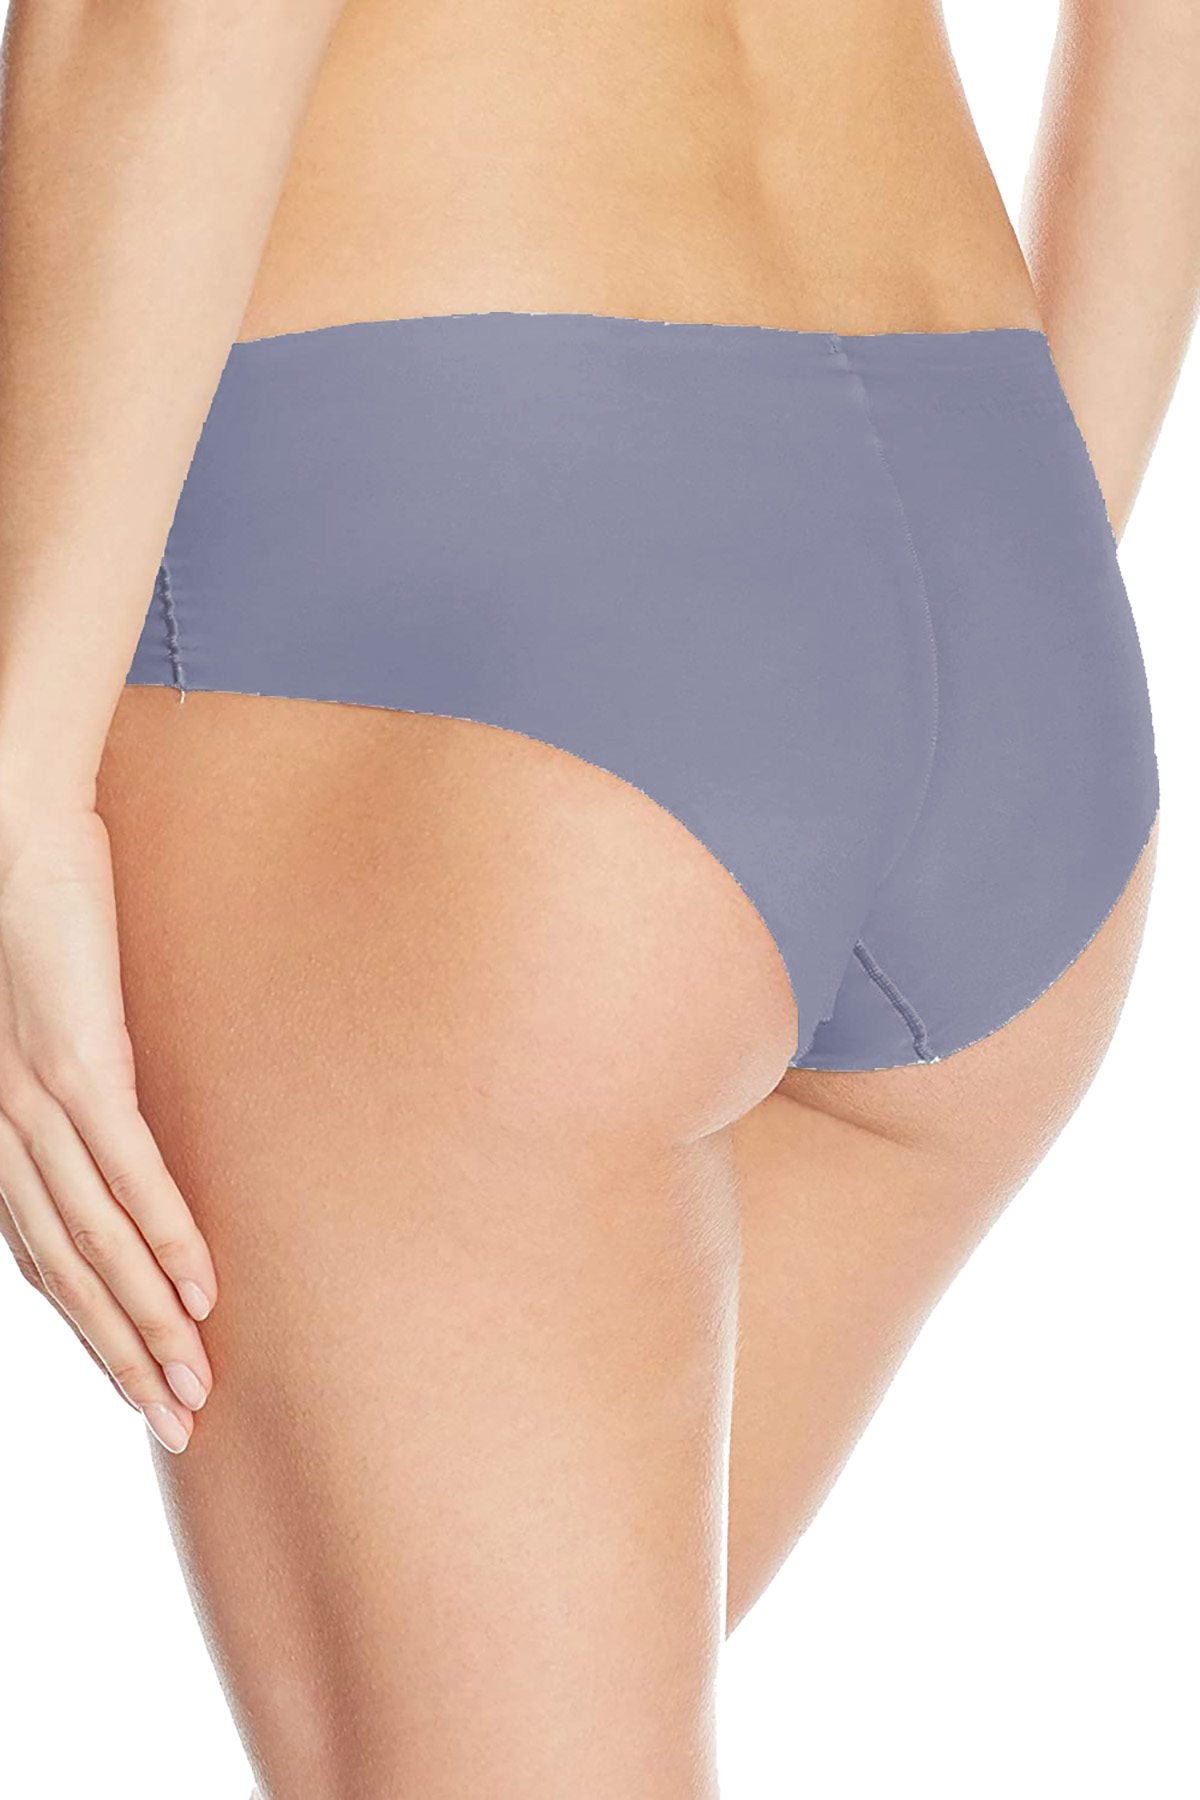 Calvin Klein Blue Granite Invisibles Hipster Panty